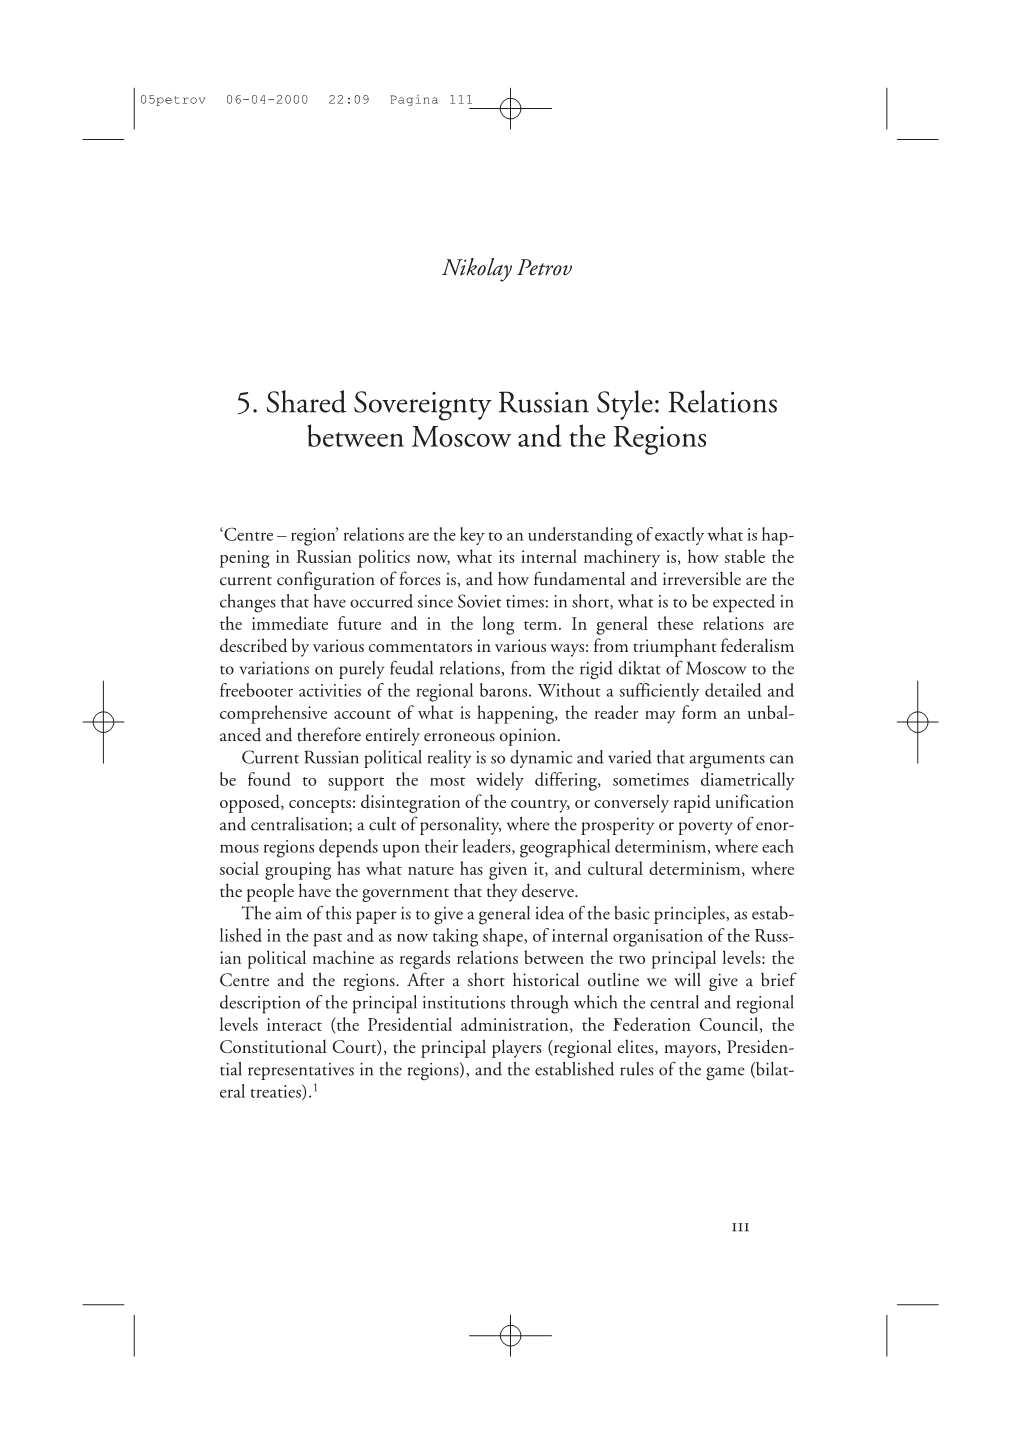 5. Shared Sovereignty Russian Style: Relations Between Moscow and the Regions